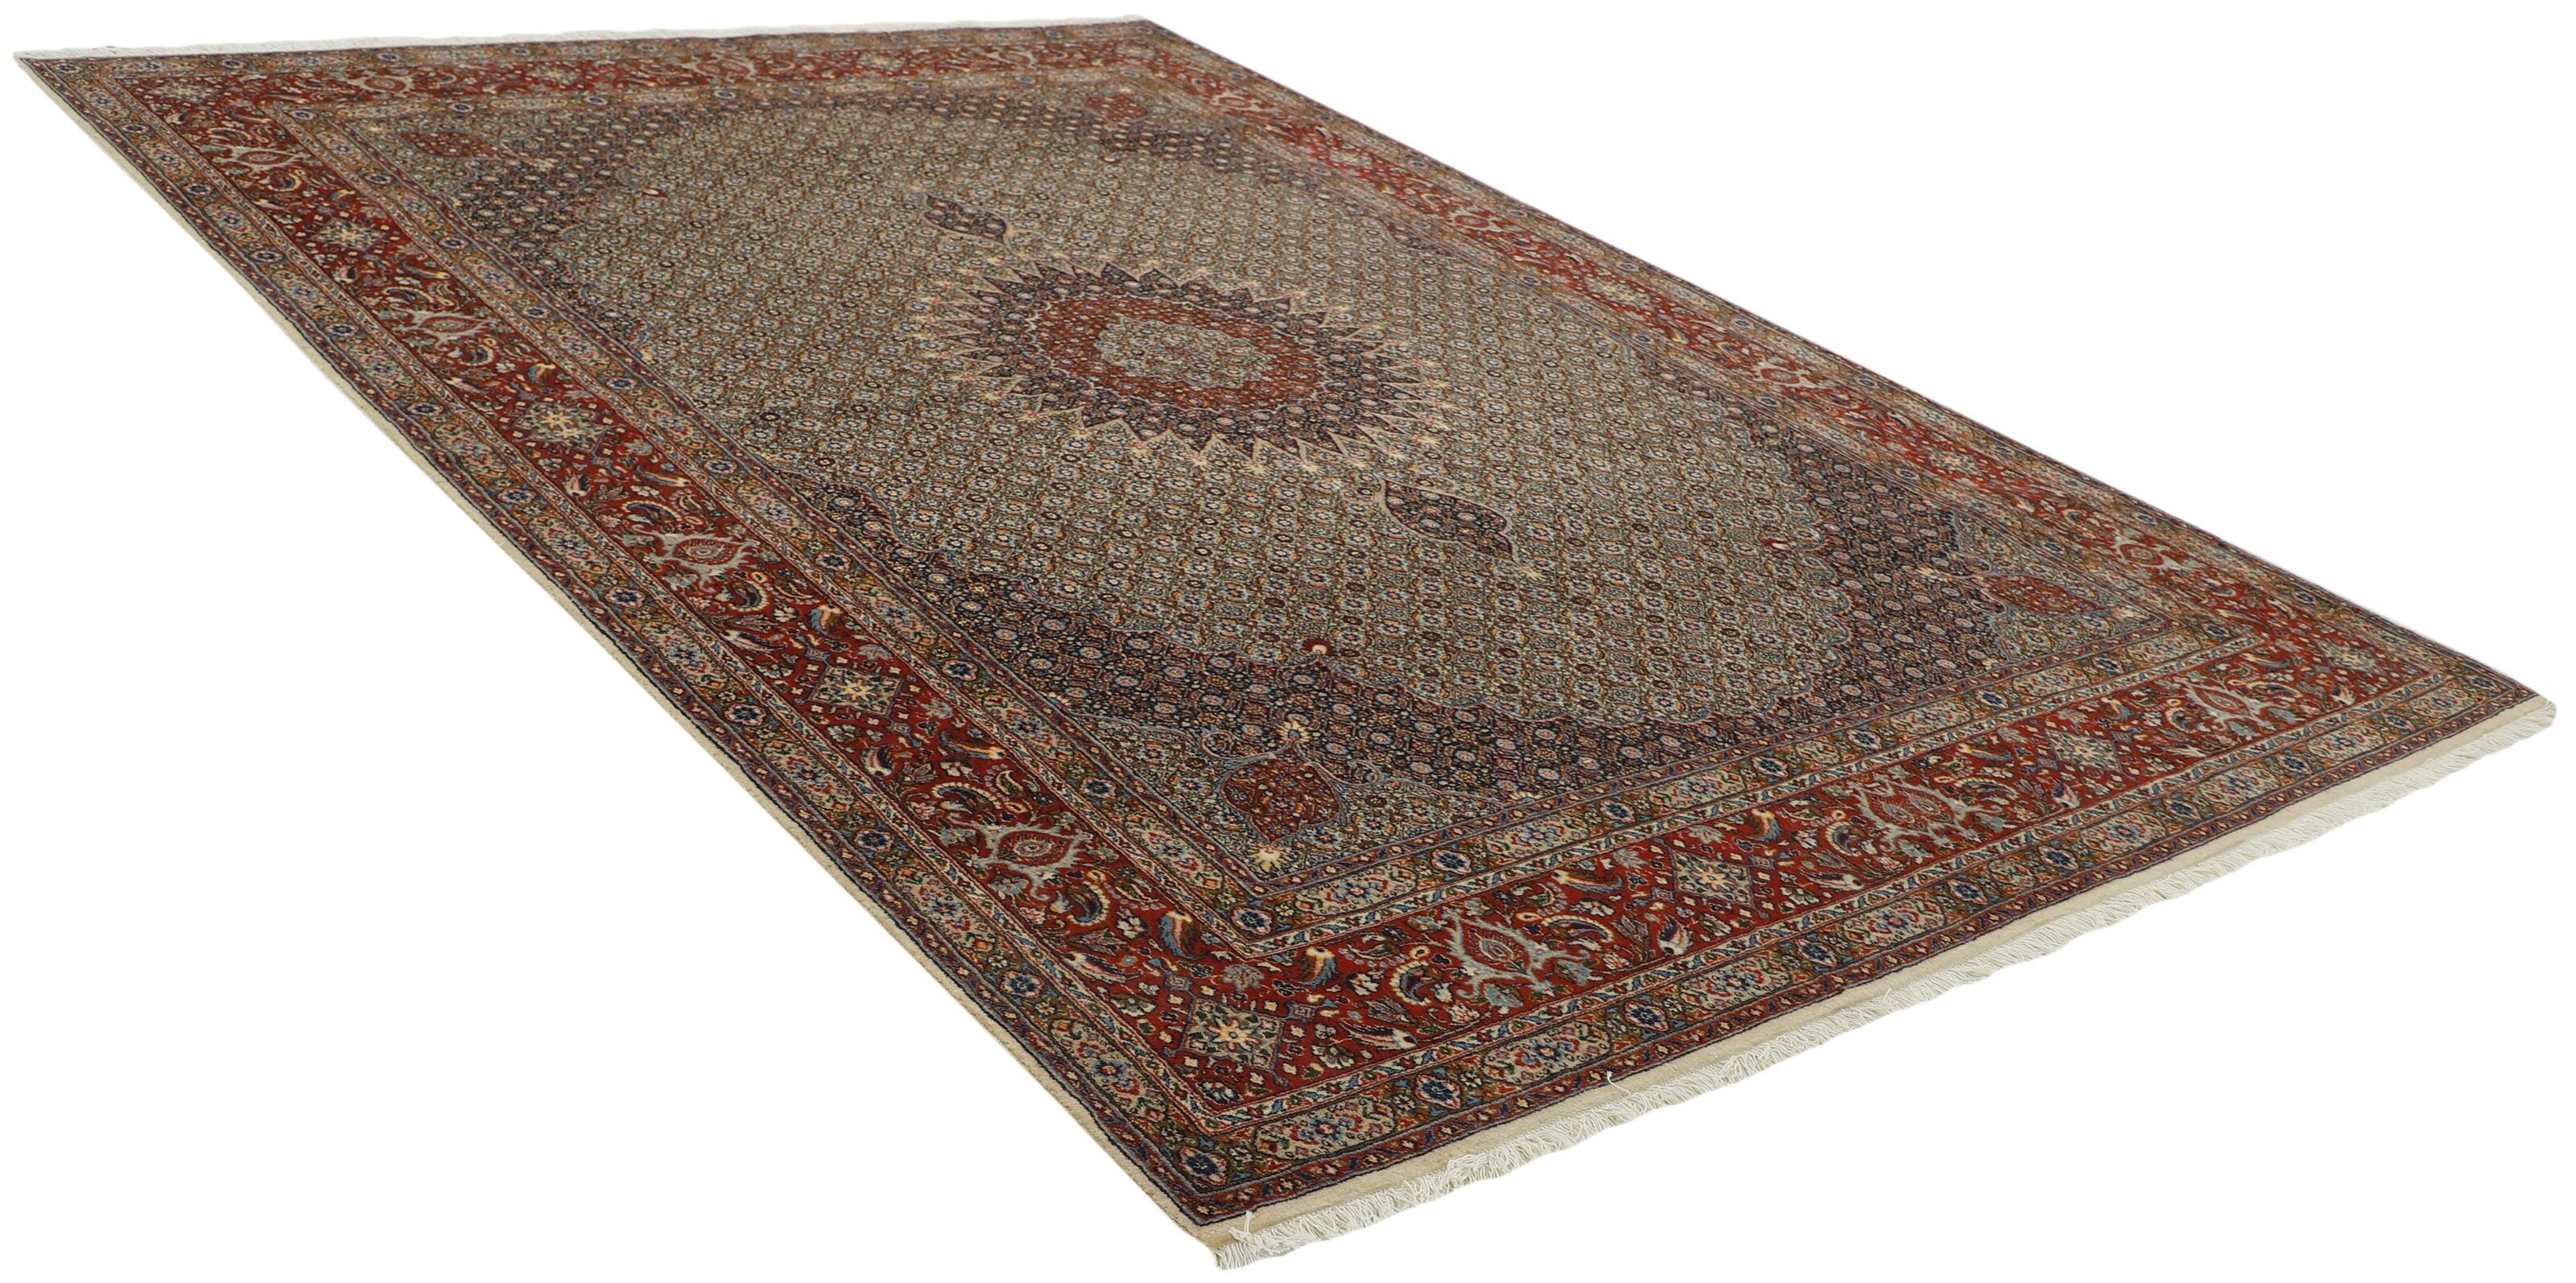  authentic persian rug with traditional floral pattern in red, pink, yellow, blue, green, cream, beige, brown and black